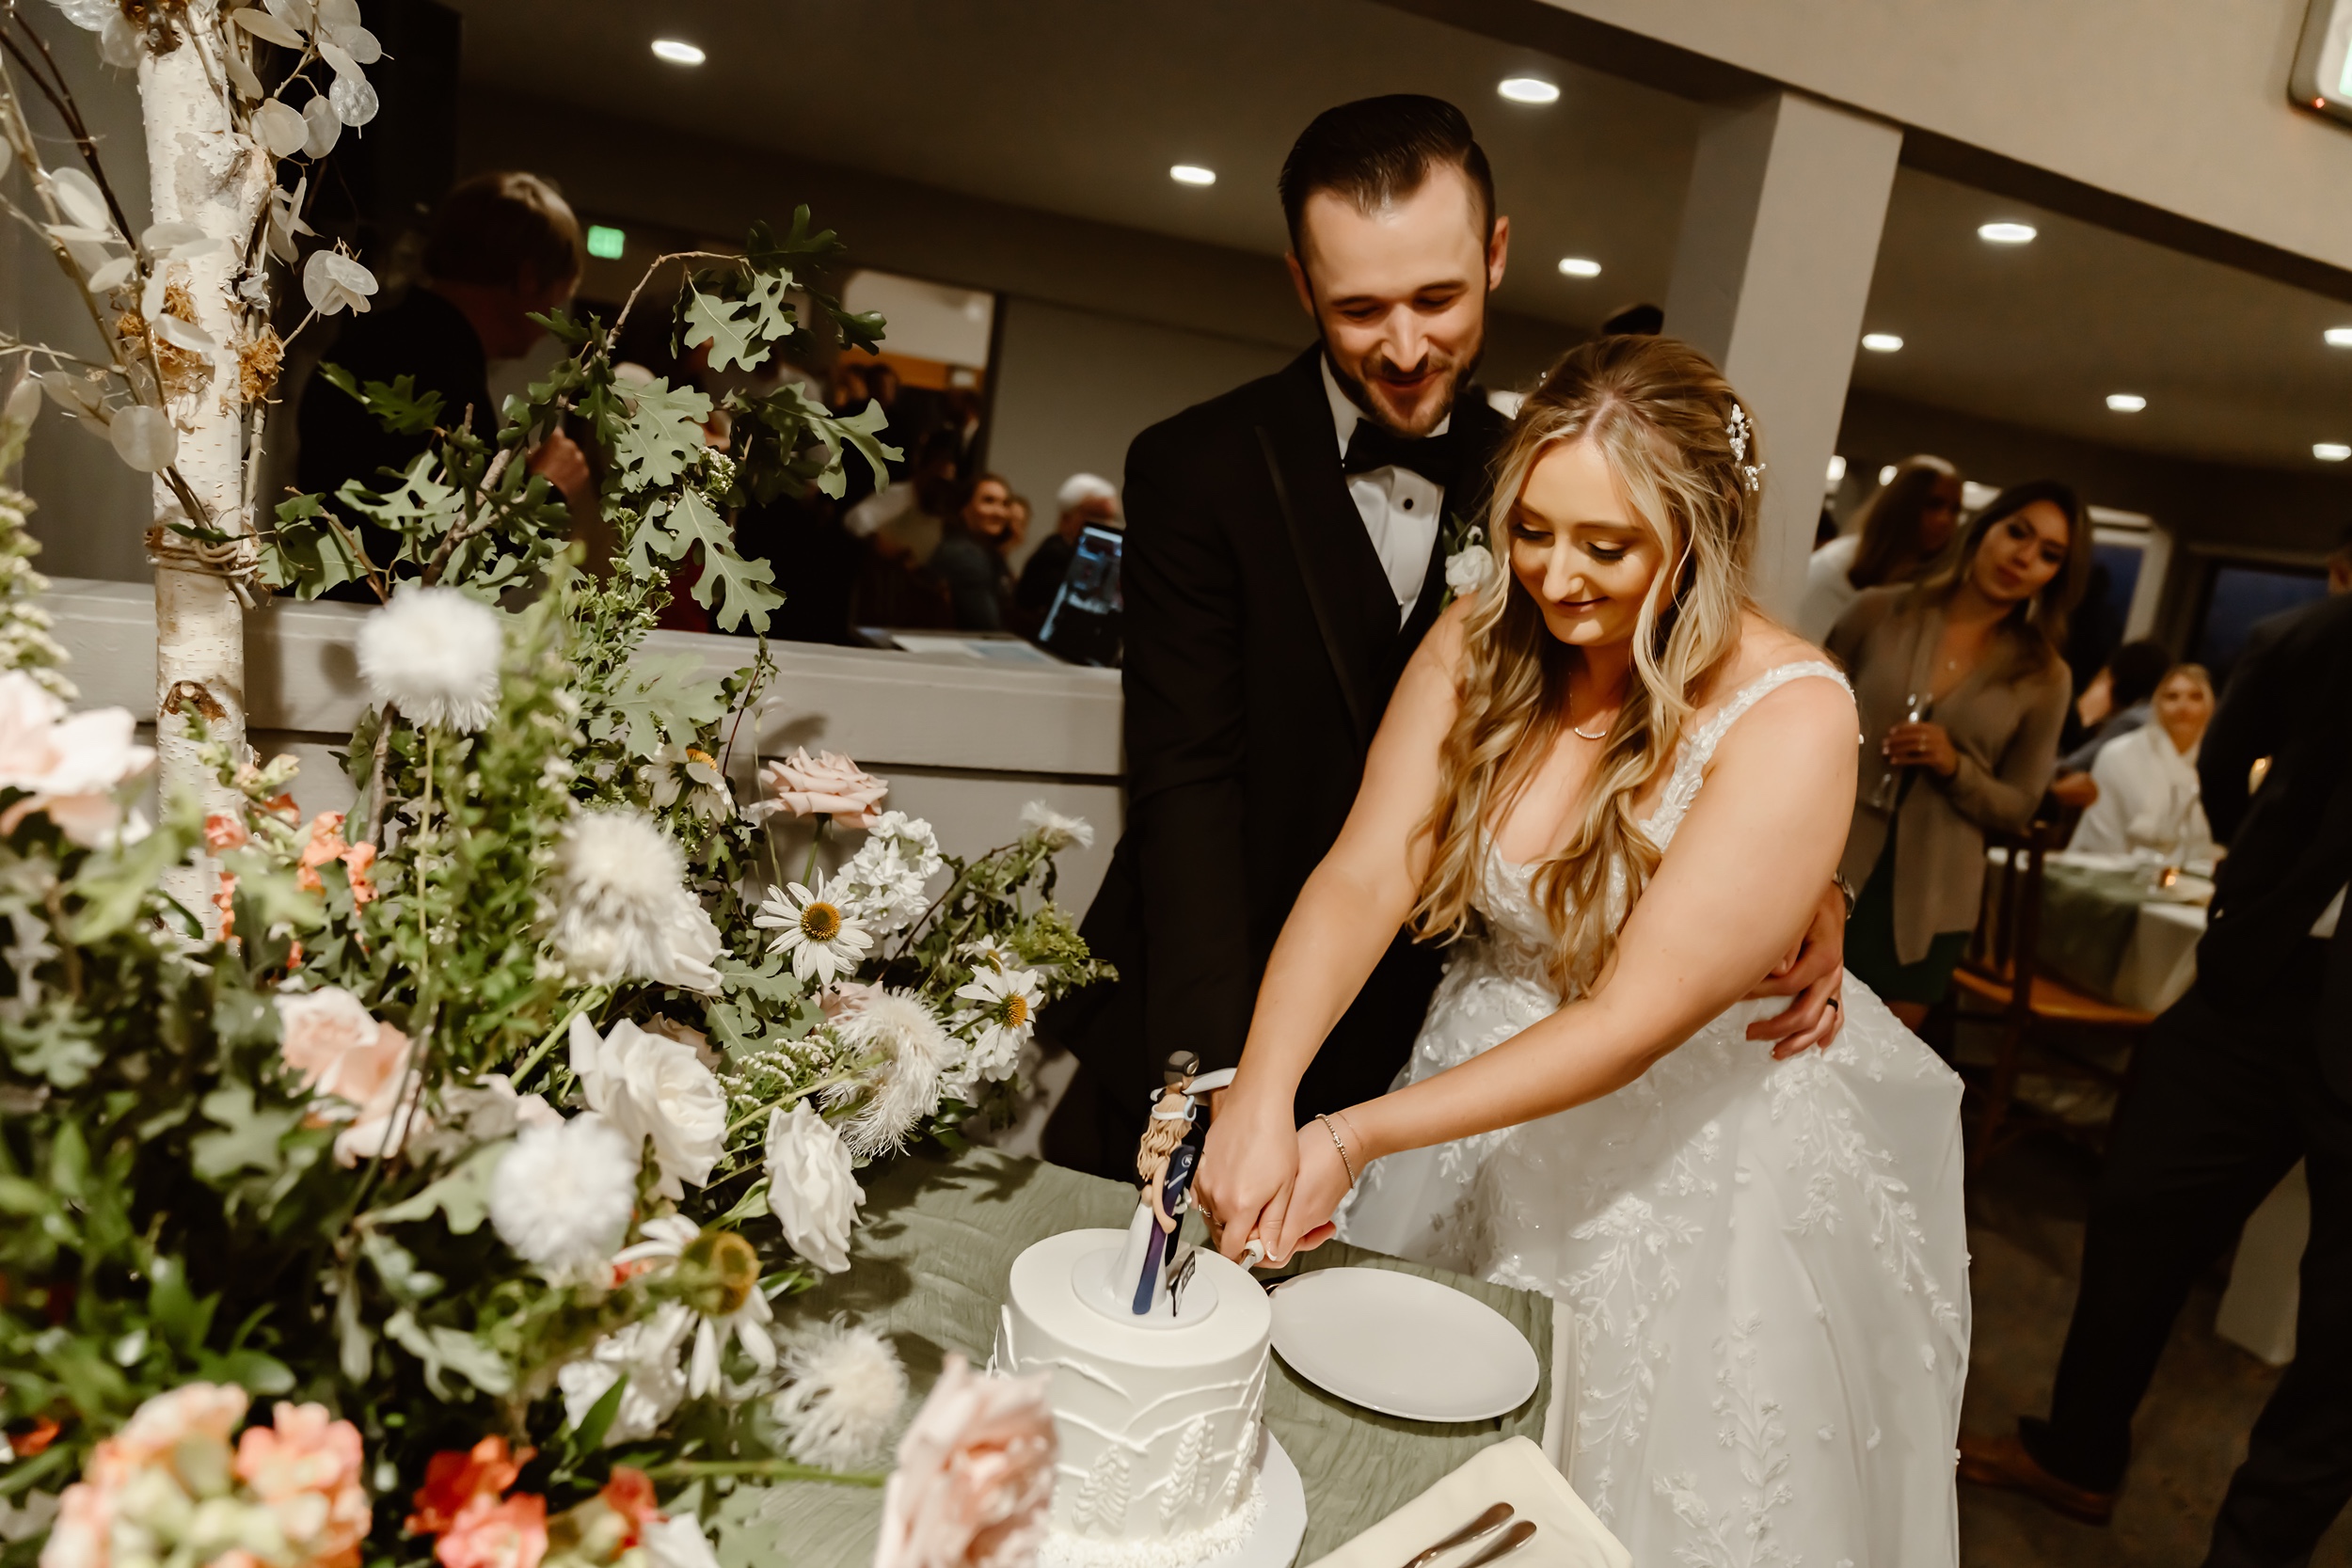 Bride and groom cut cake at the wedding reception